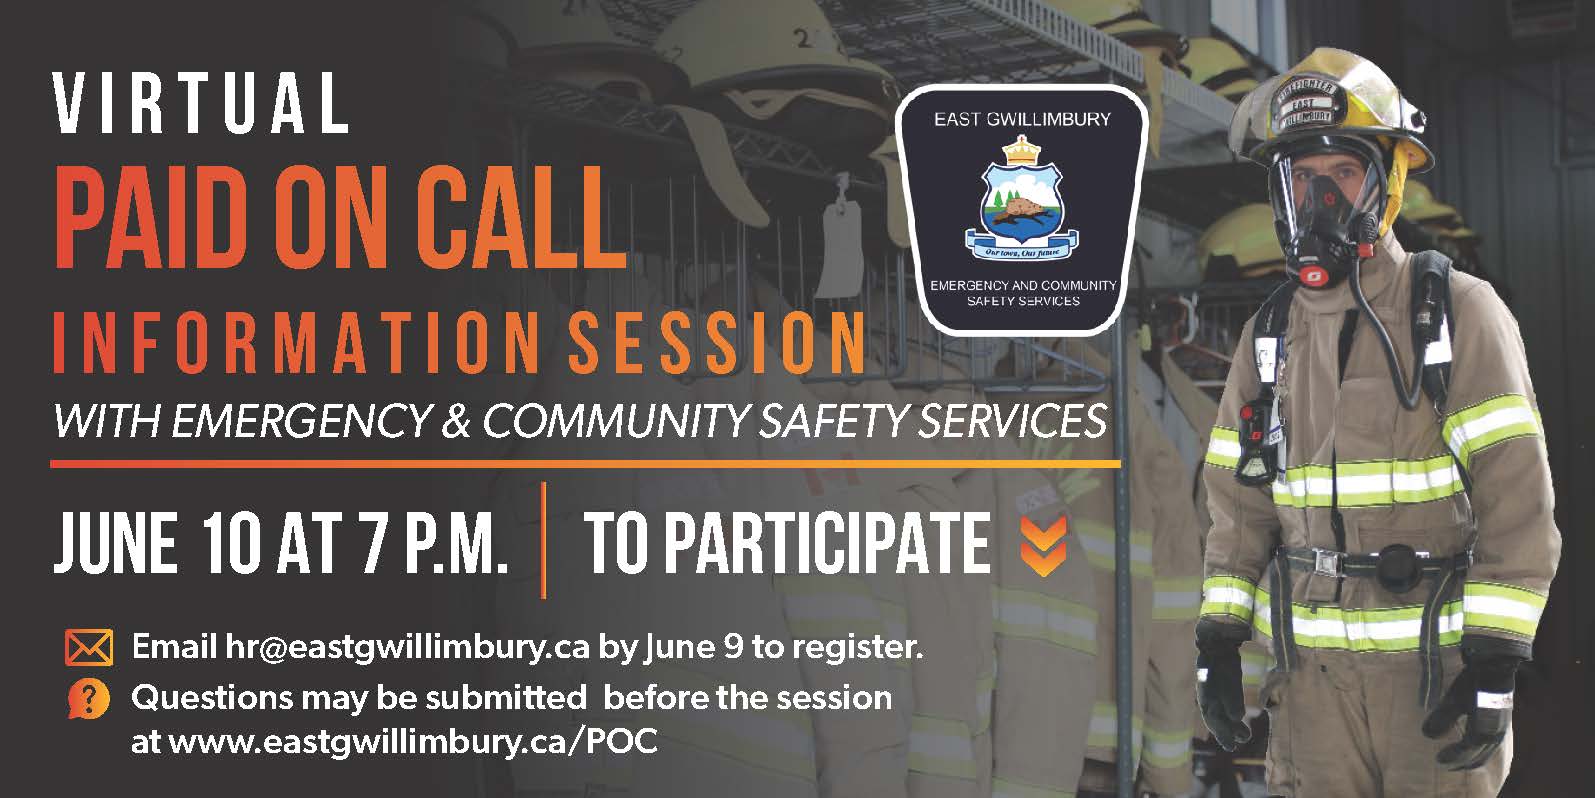 Paid On Call firefighter information session ad